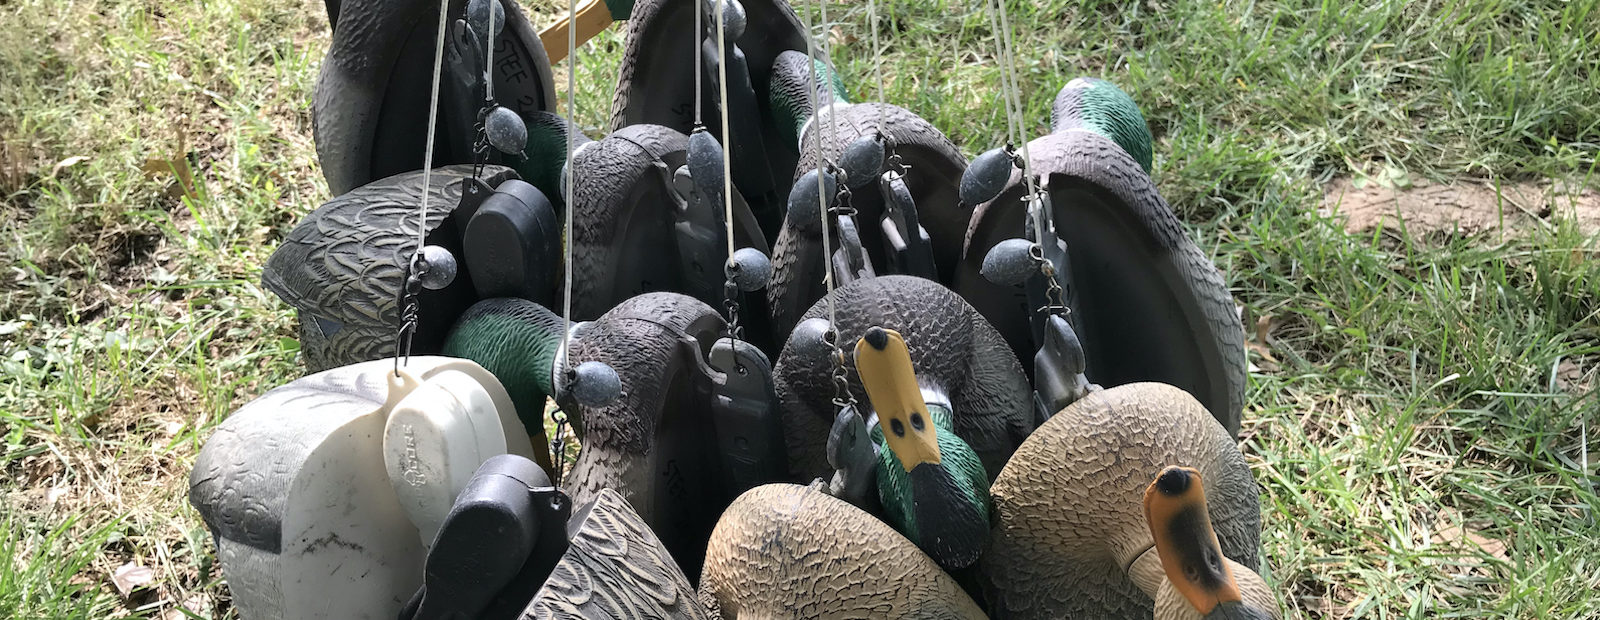 Duck decoys with texas rig anchors hang together